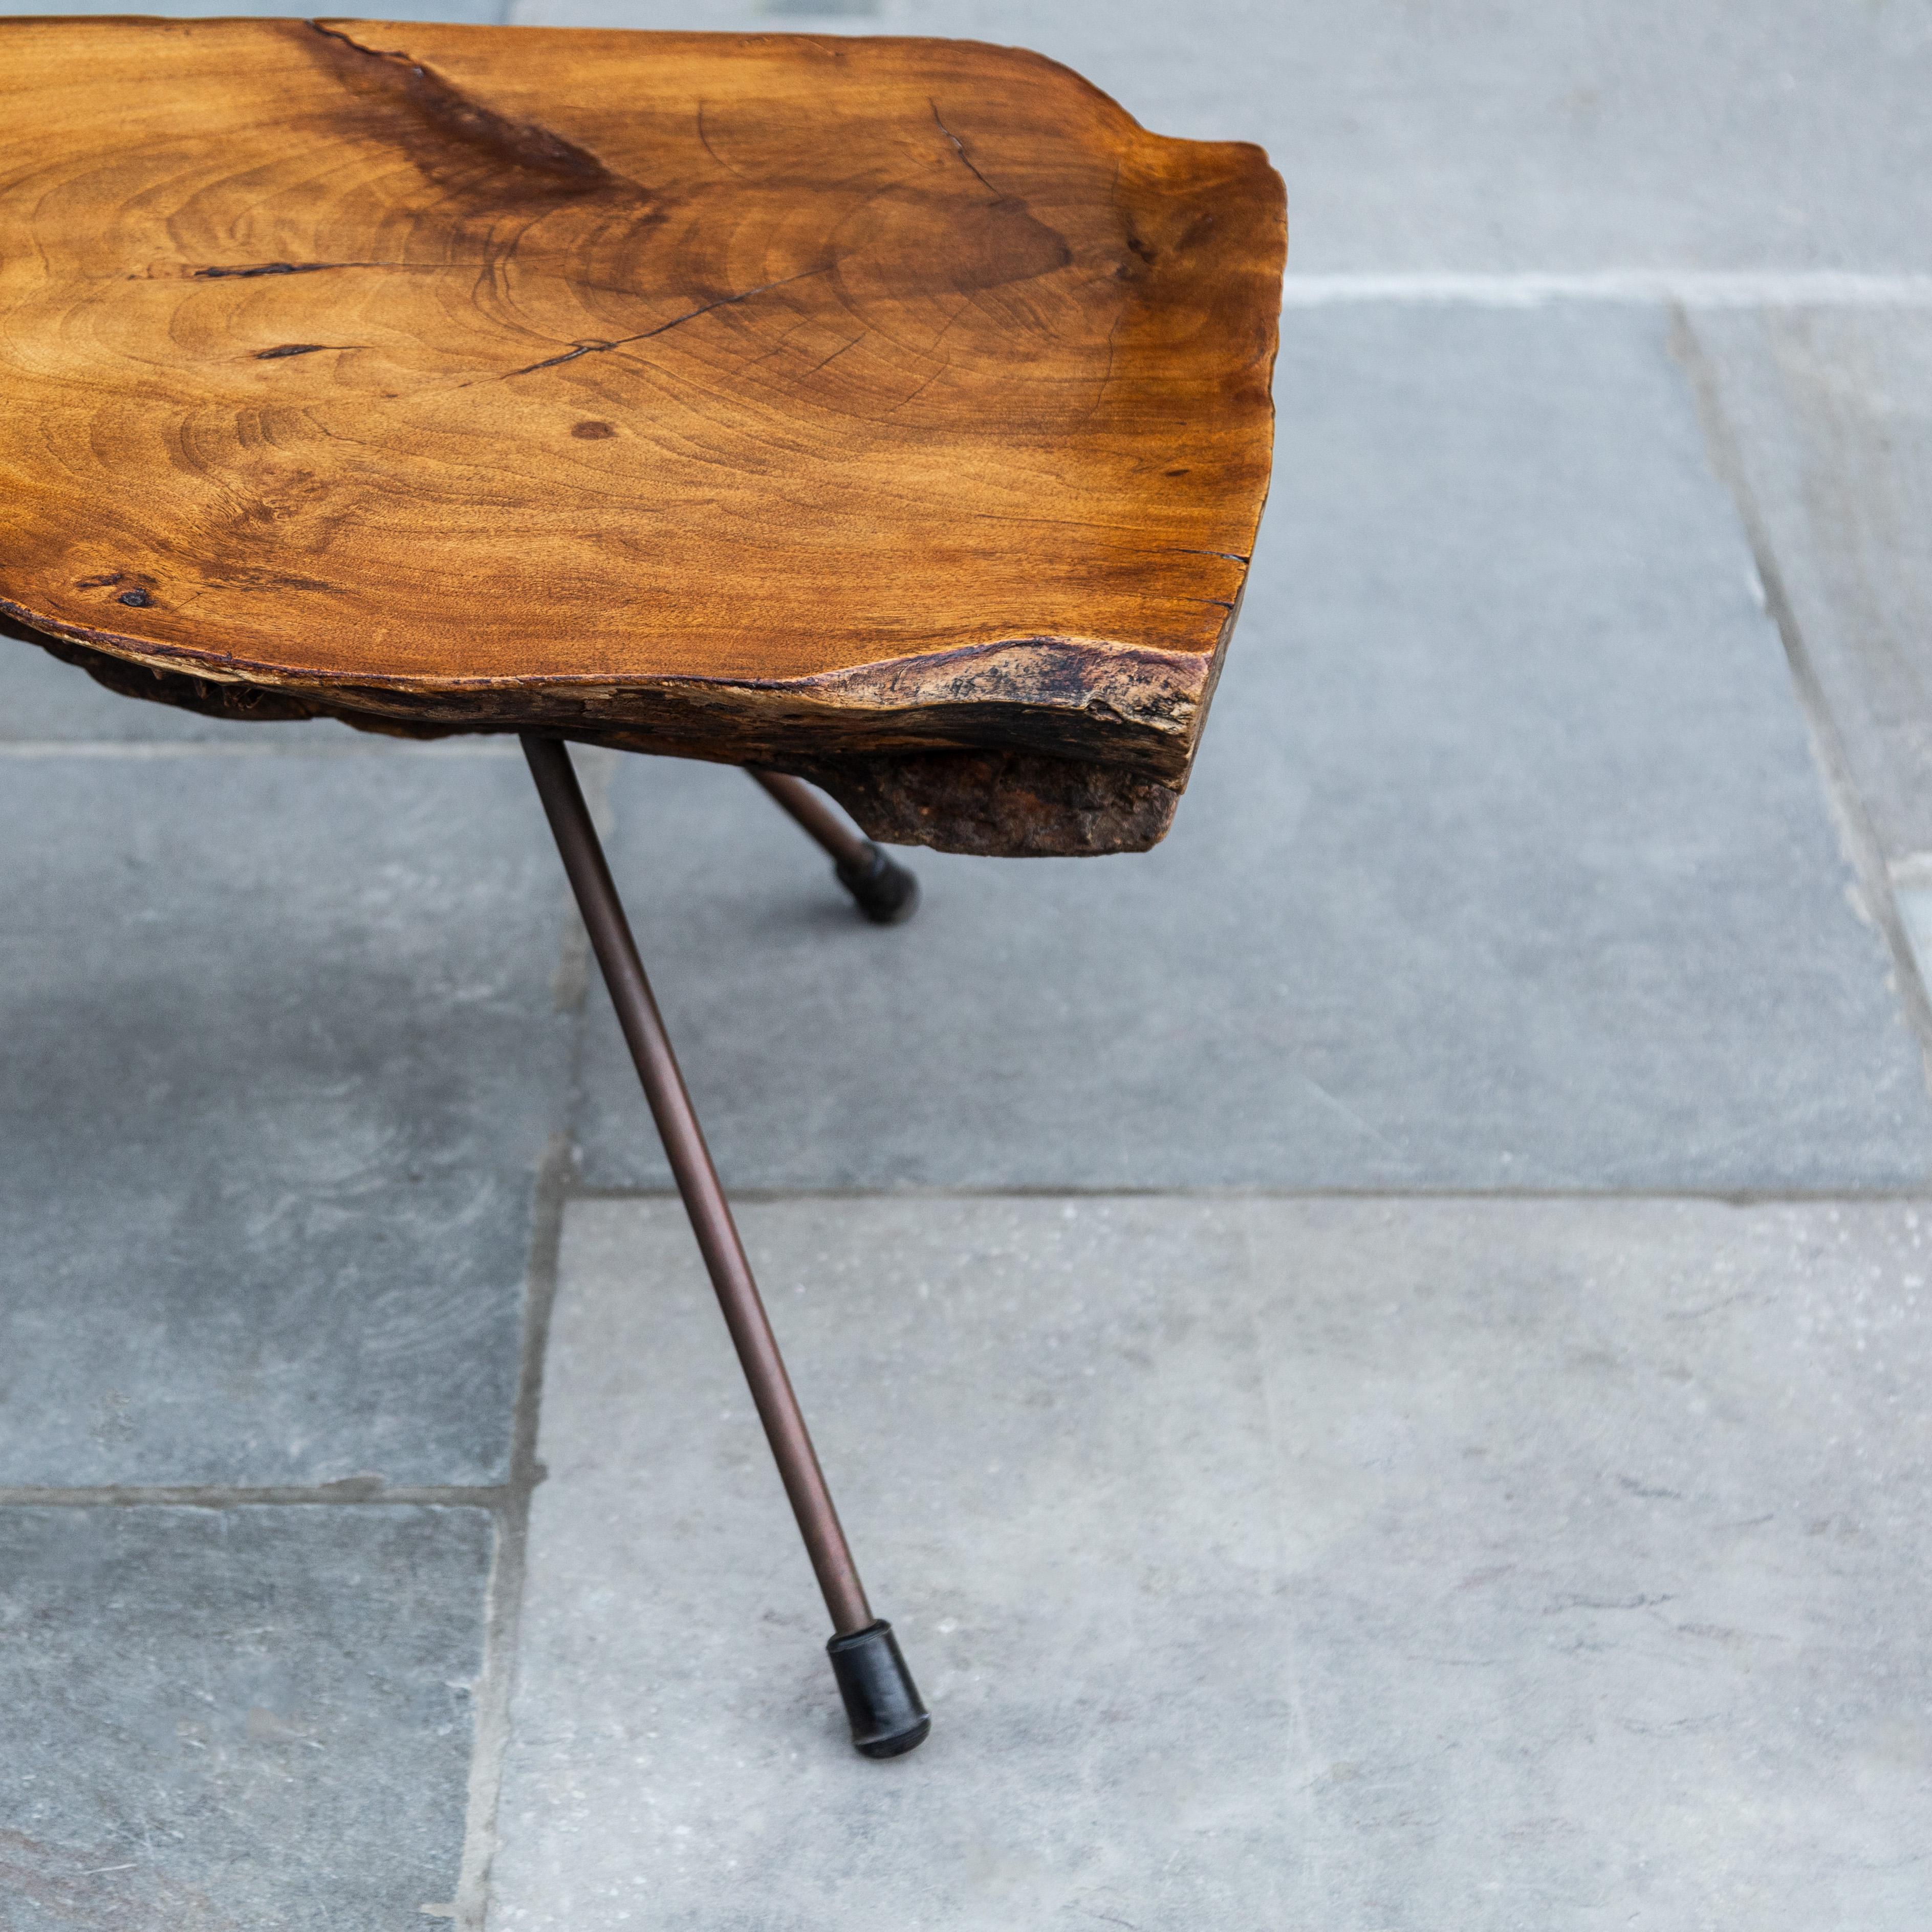 Large Mahogany Tree Trunk Table, Carl Auböck, 1940s For Sale 9